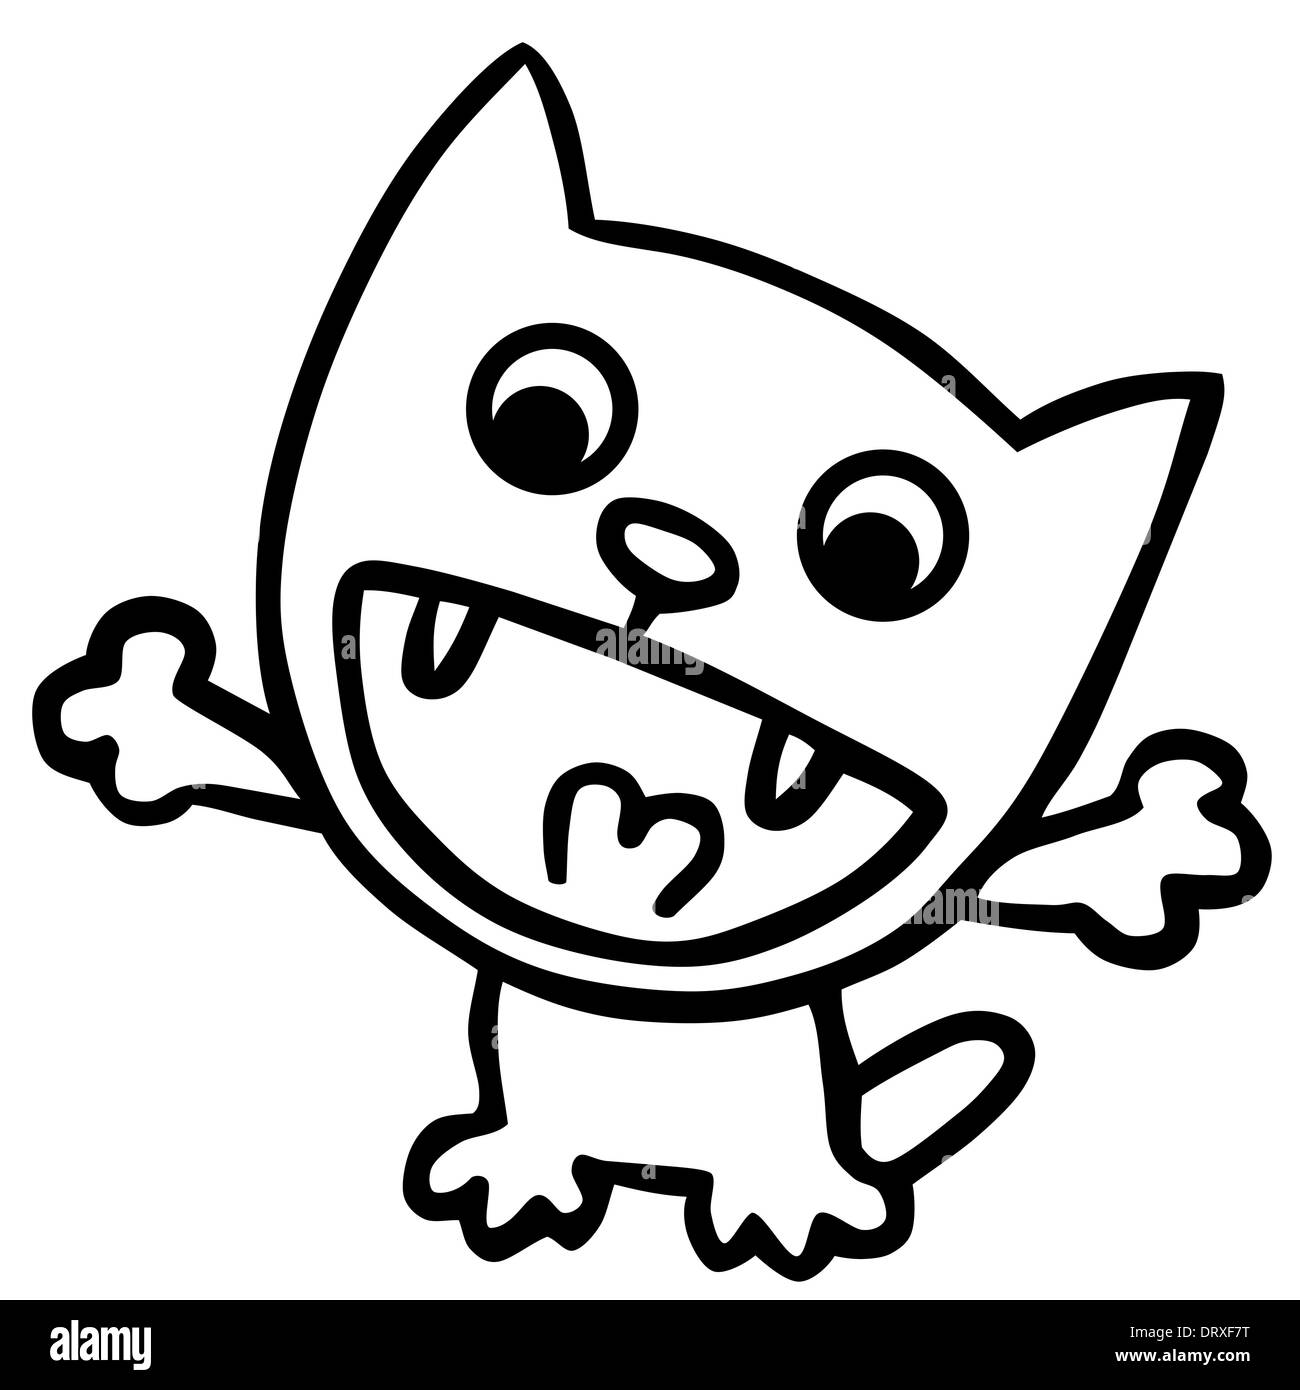 Illustration of a funny monster, opened his mouth and waving paws. Stock Photo